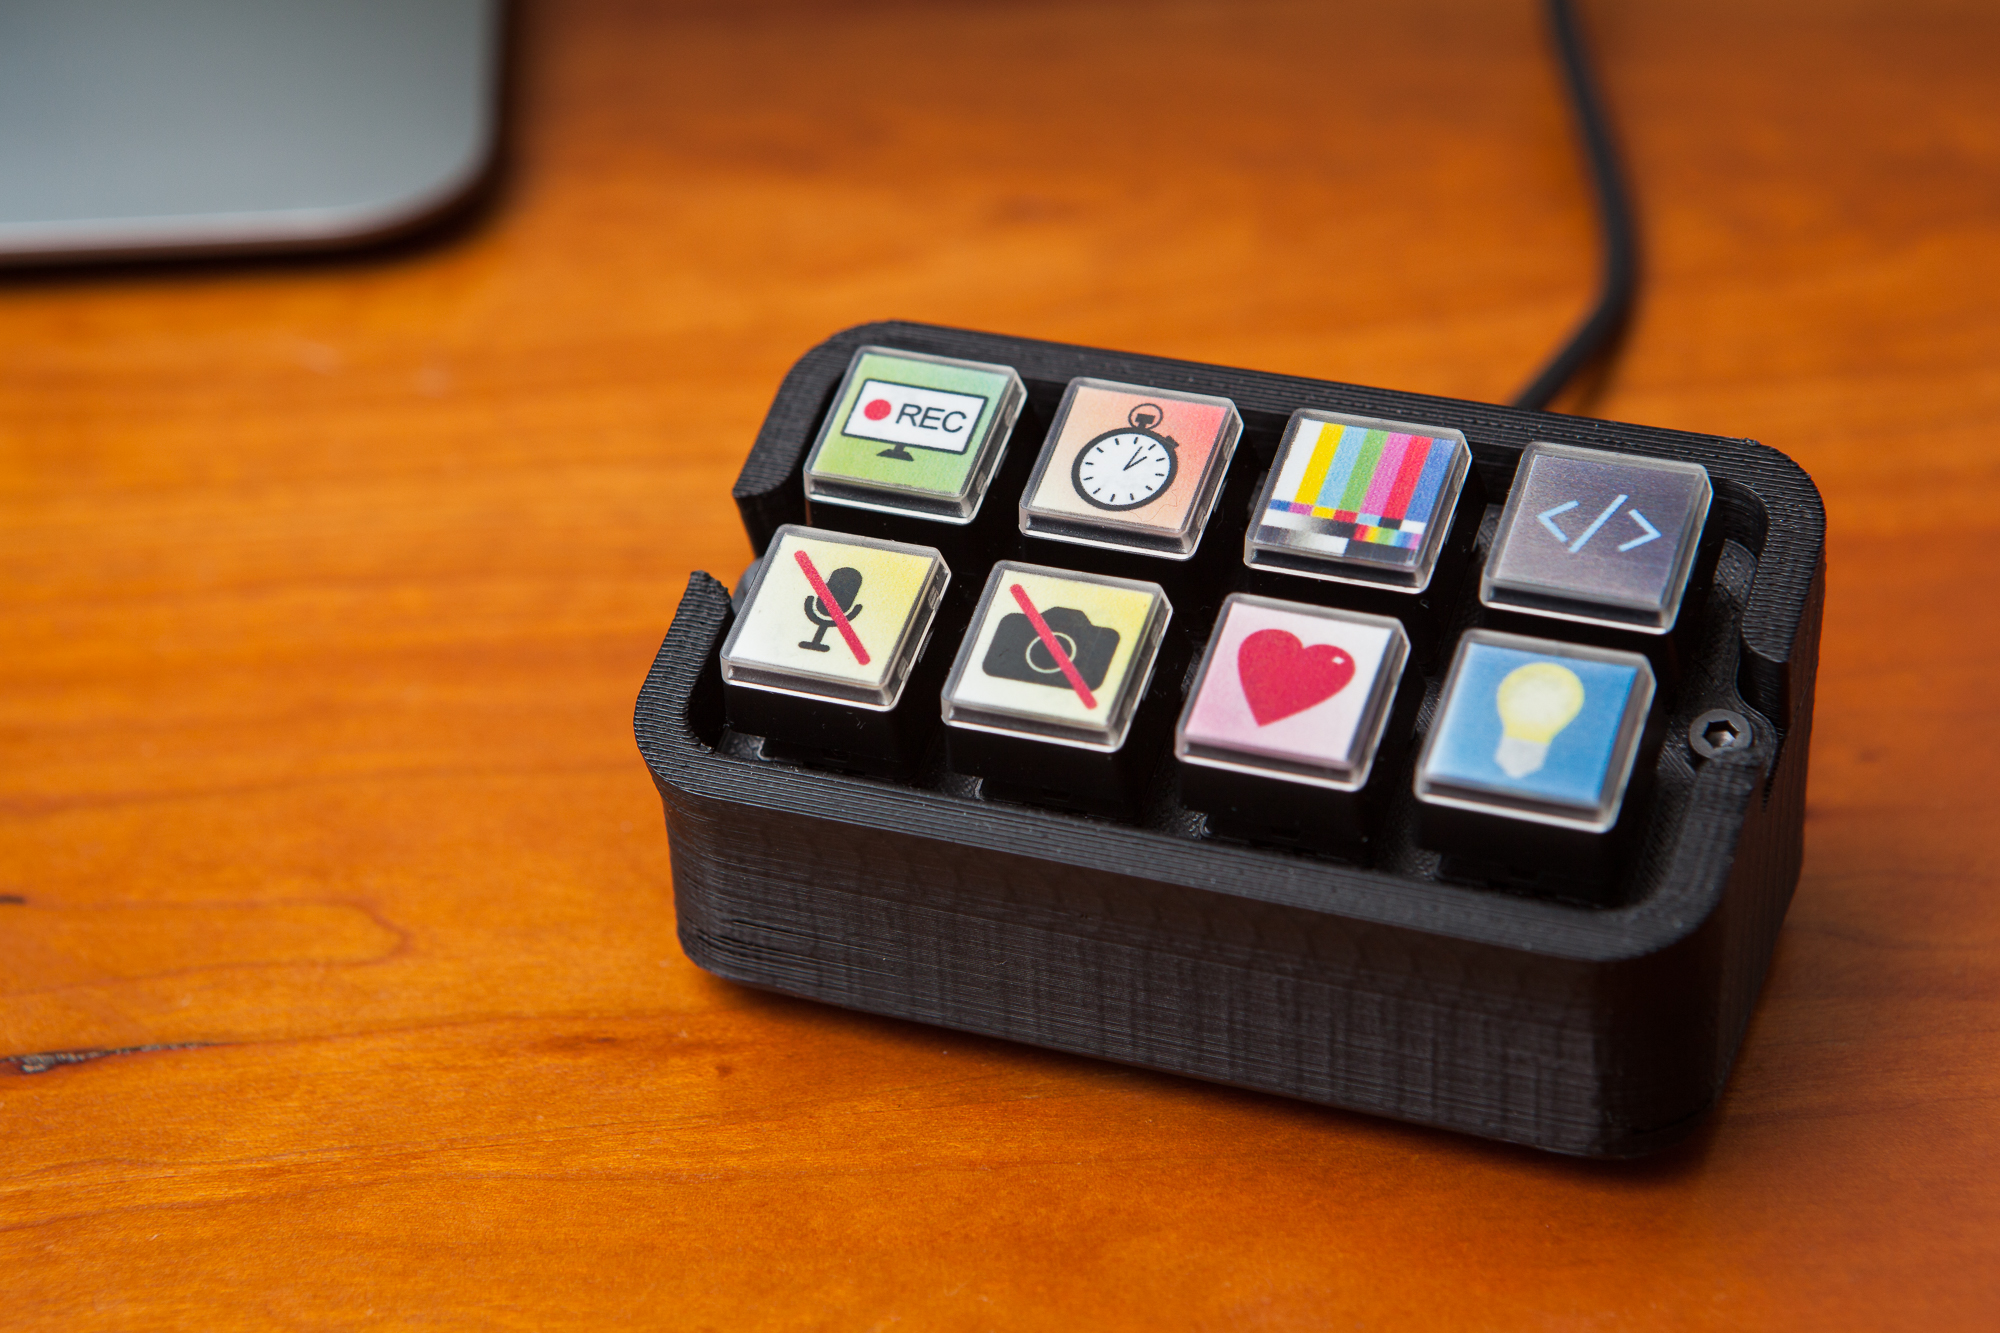 Building a DIY Stream Deck Included (Mini Keyboard) - Parts Not Macro